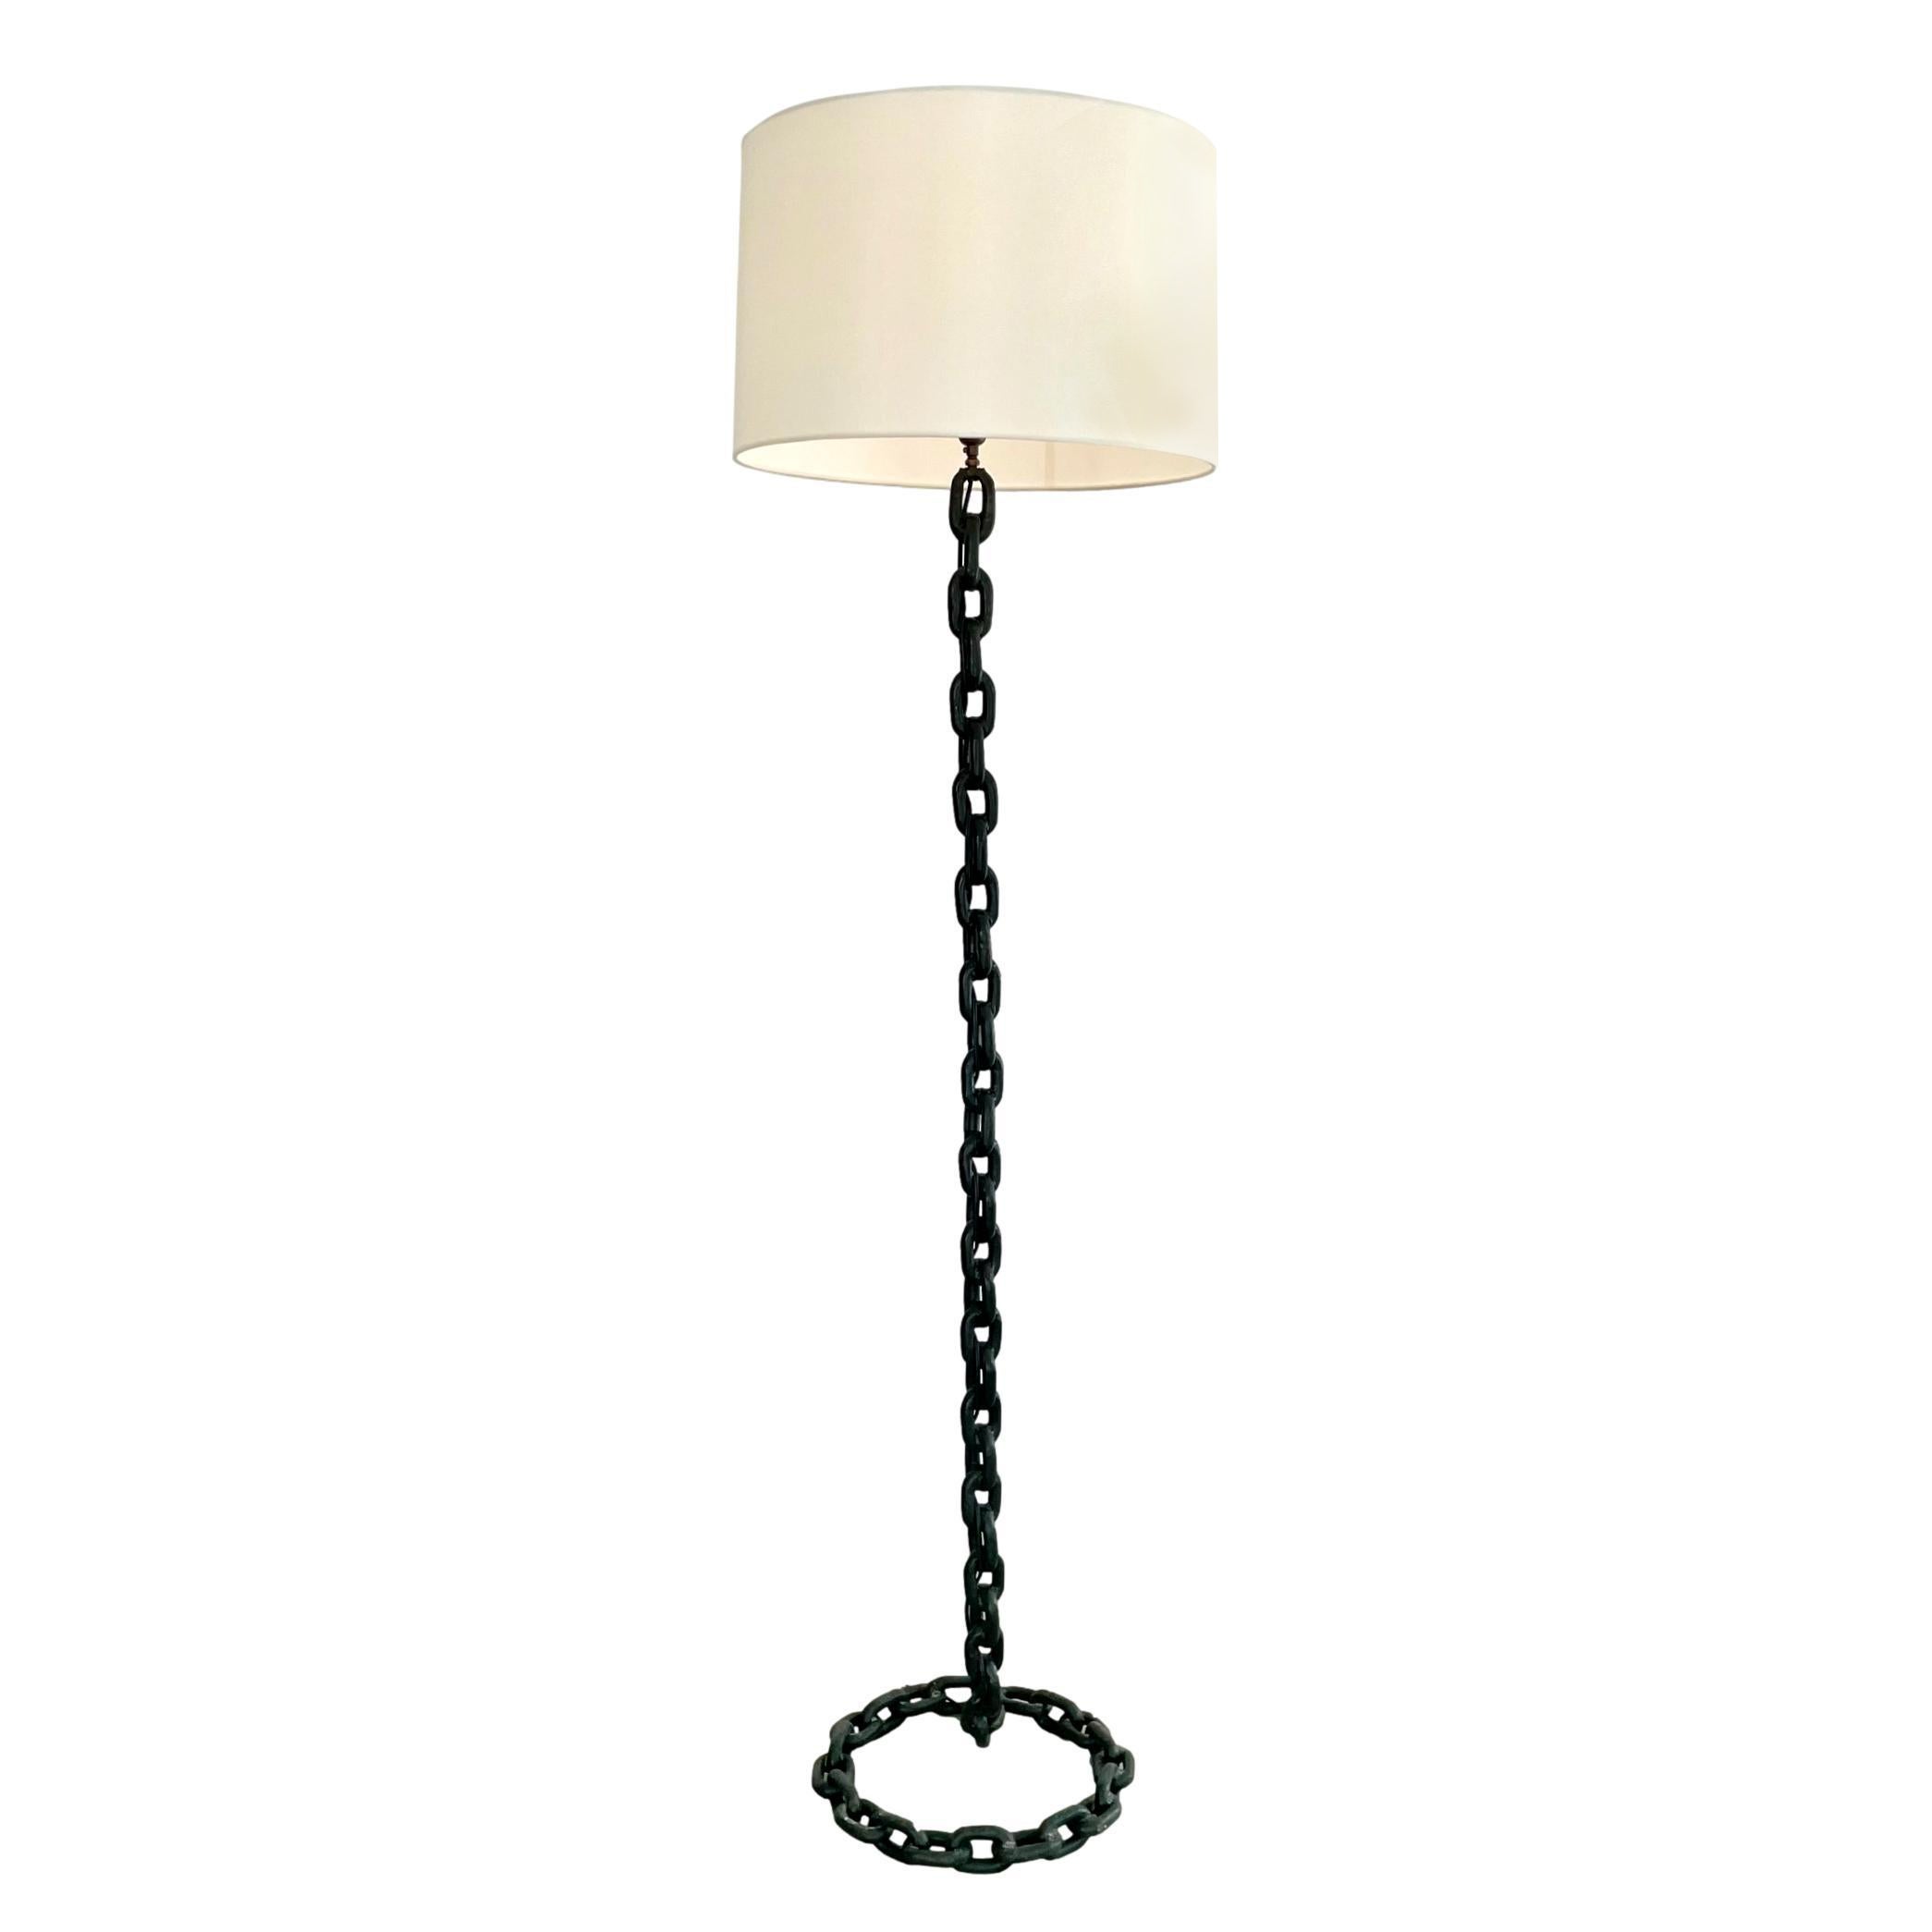 French Chain Floor Lamp, 1950s France